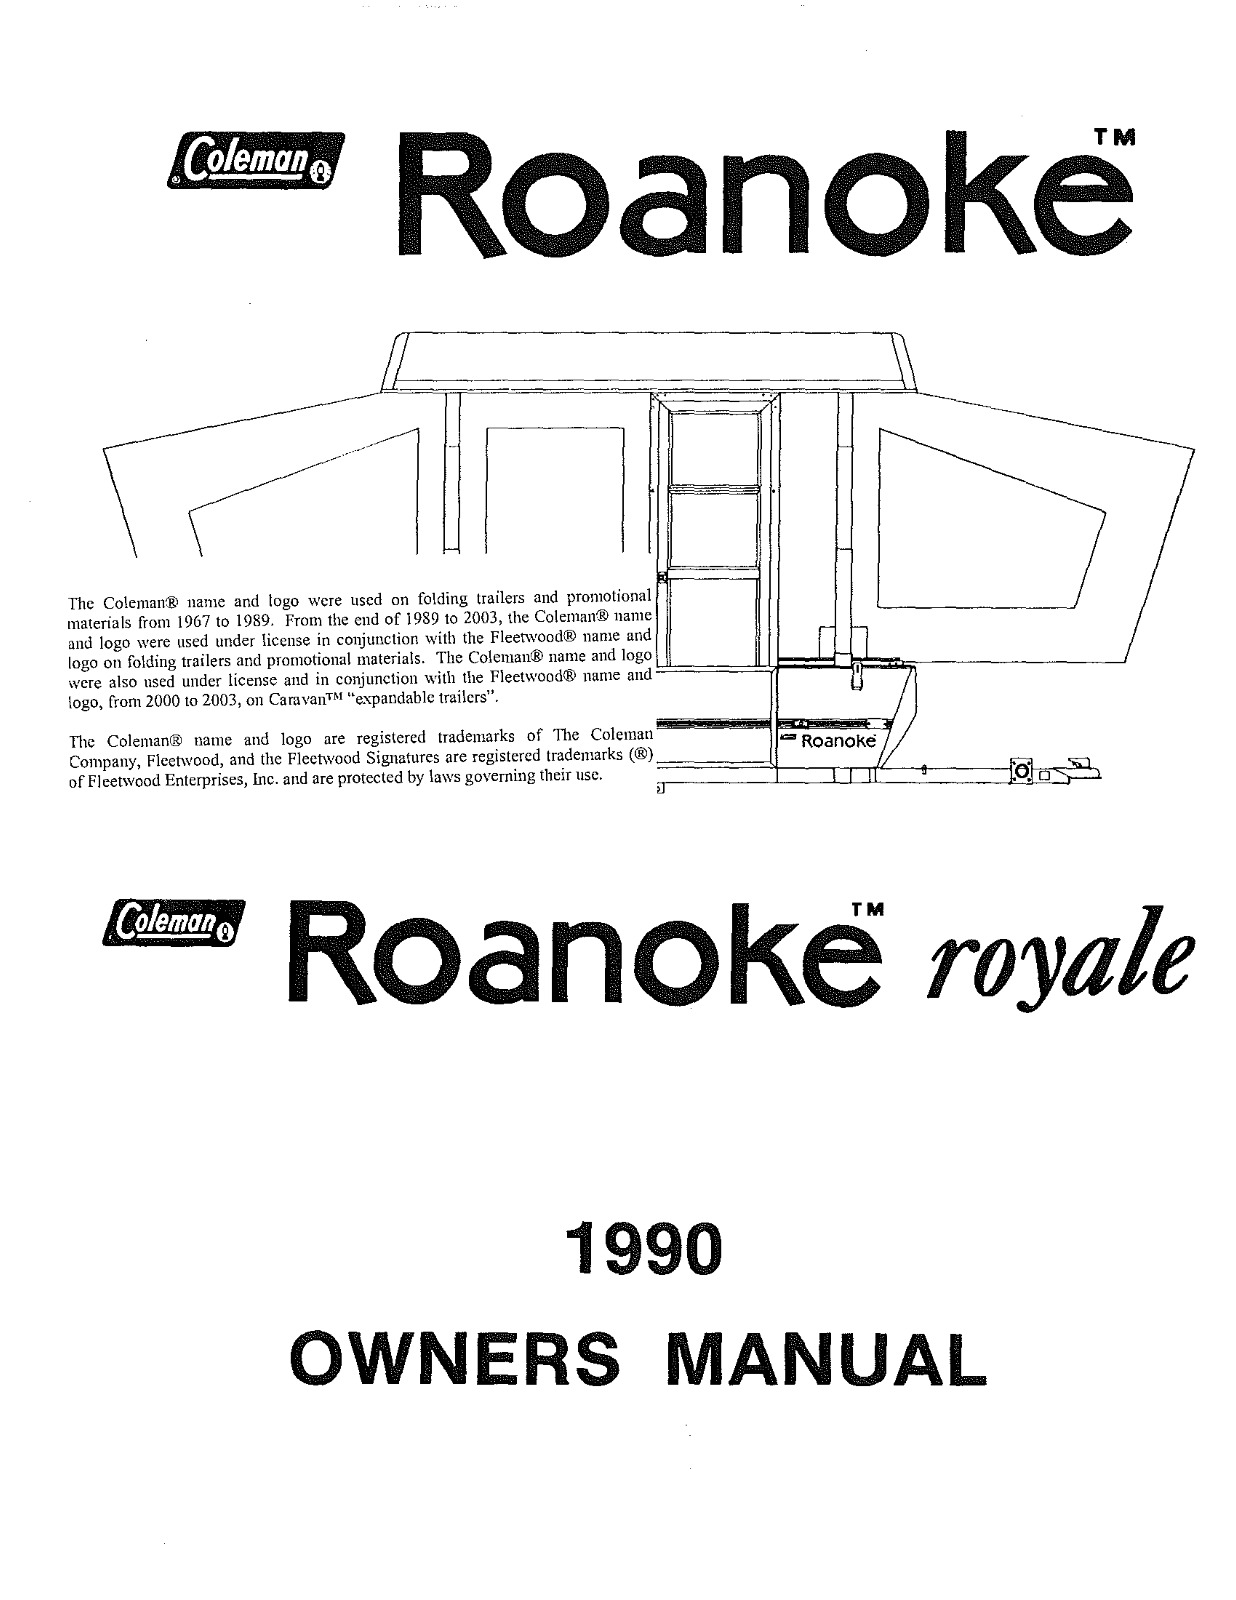 1990 COLEMAN Owners Manual Roanoke & Royale Coil Bound